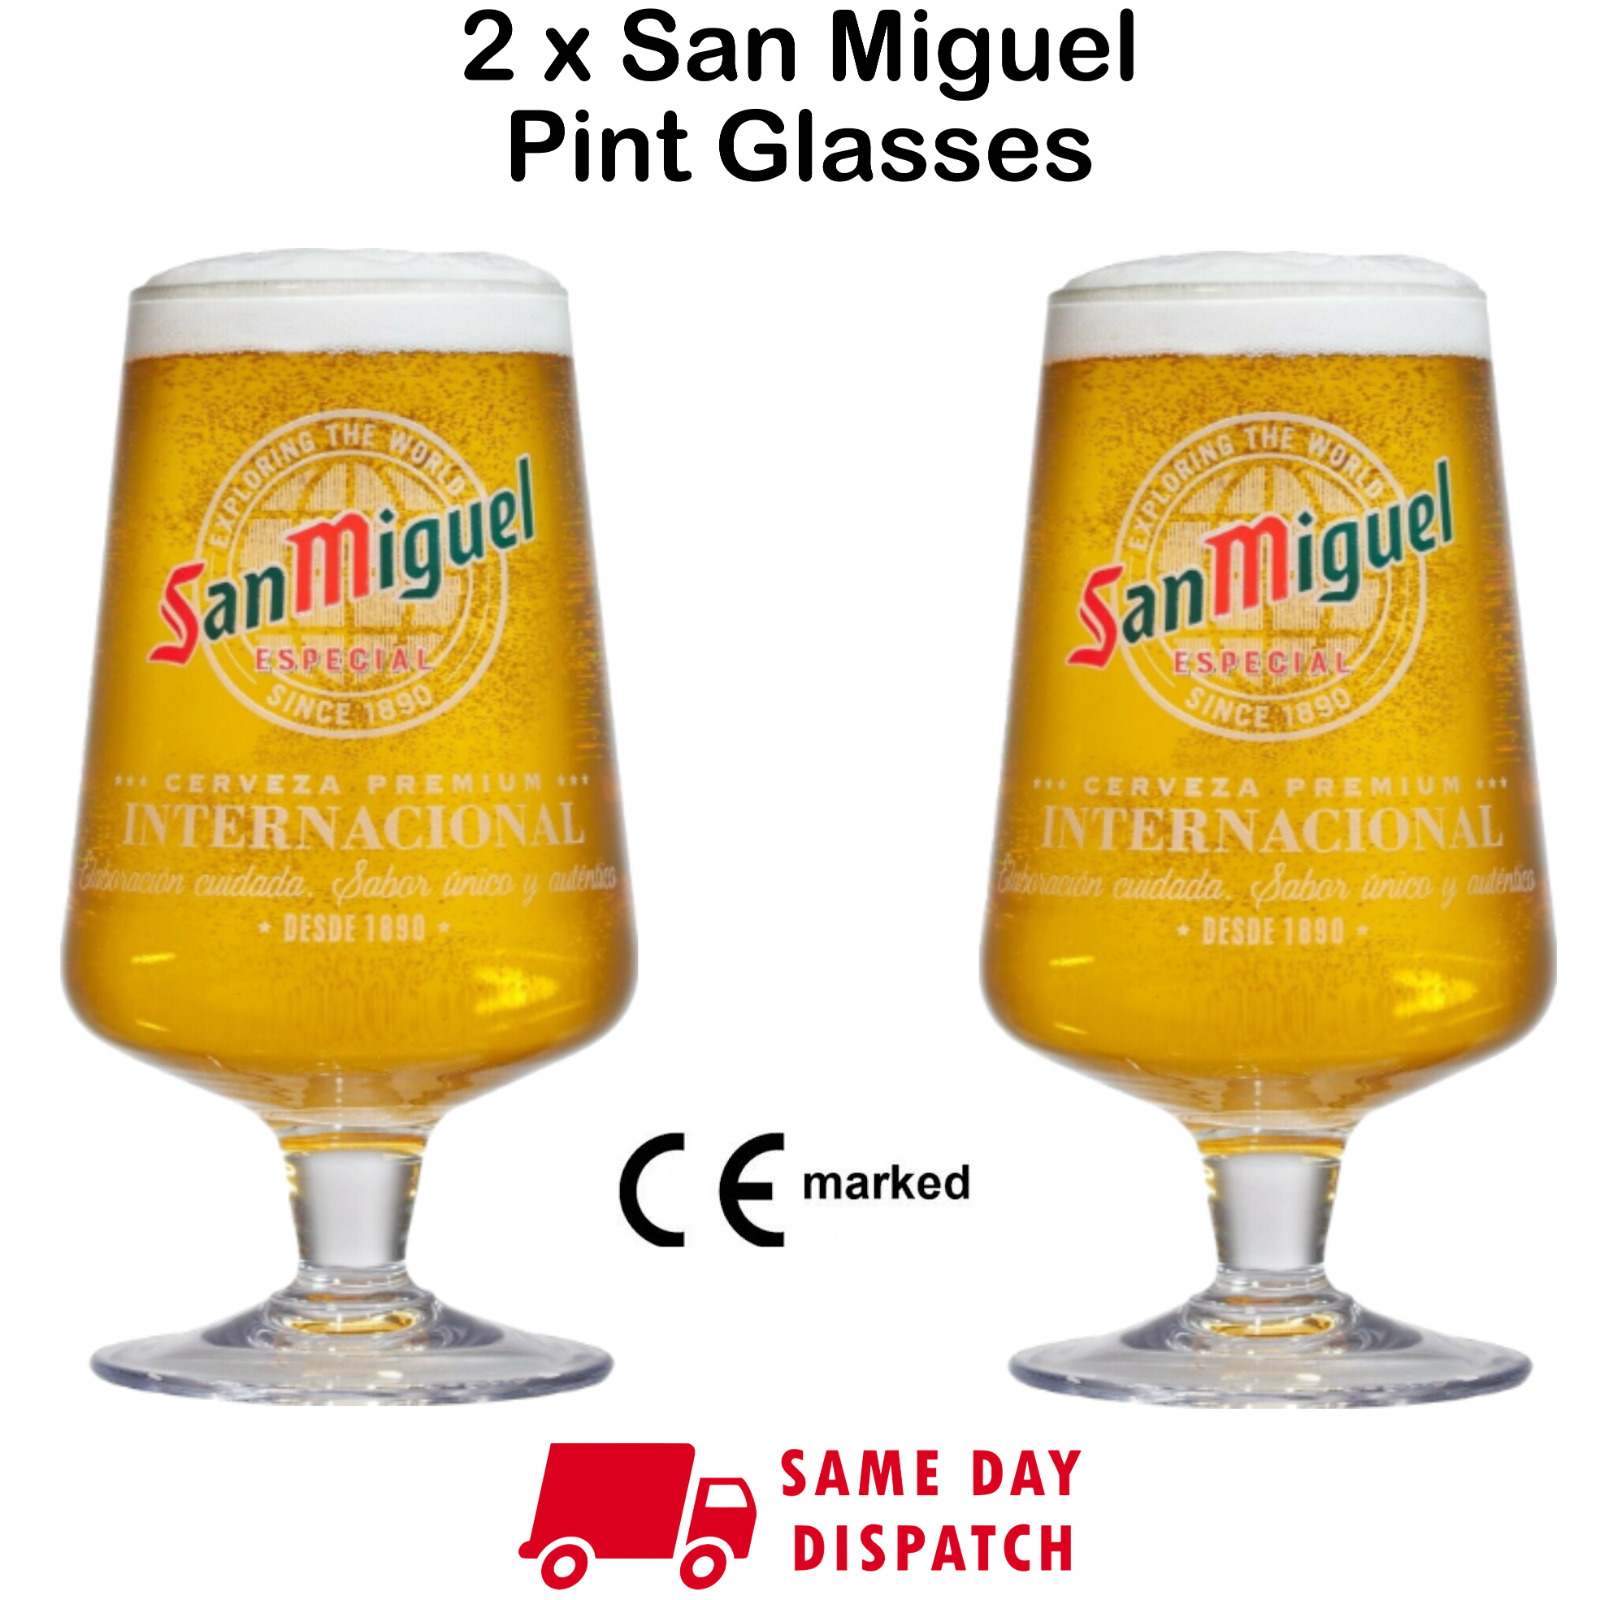 2 x San Miguel Pint Glasses, CE Marked Brand New 20oz 100% Genuine, Nucleated